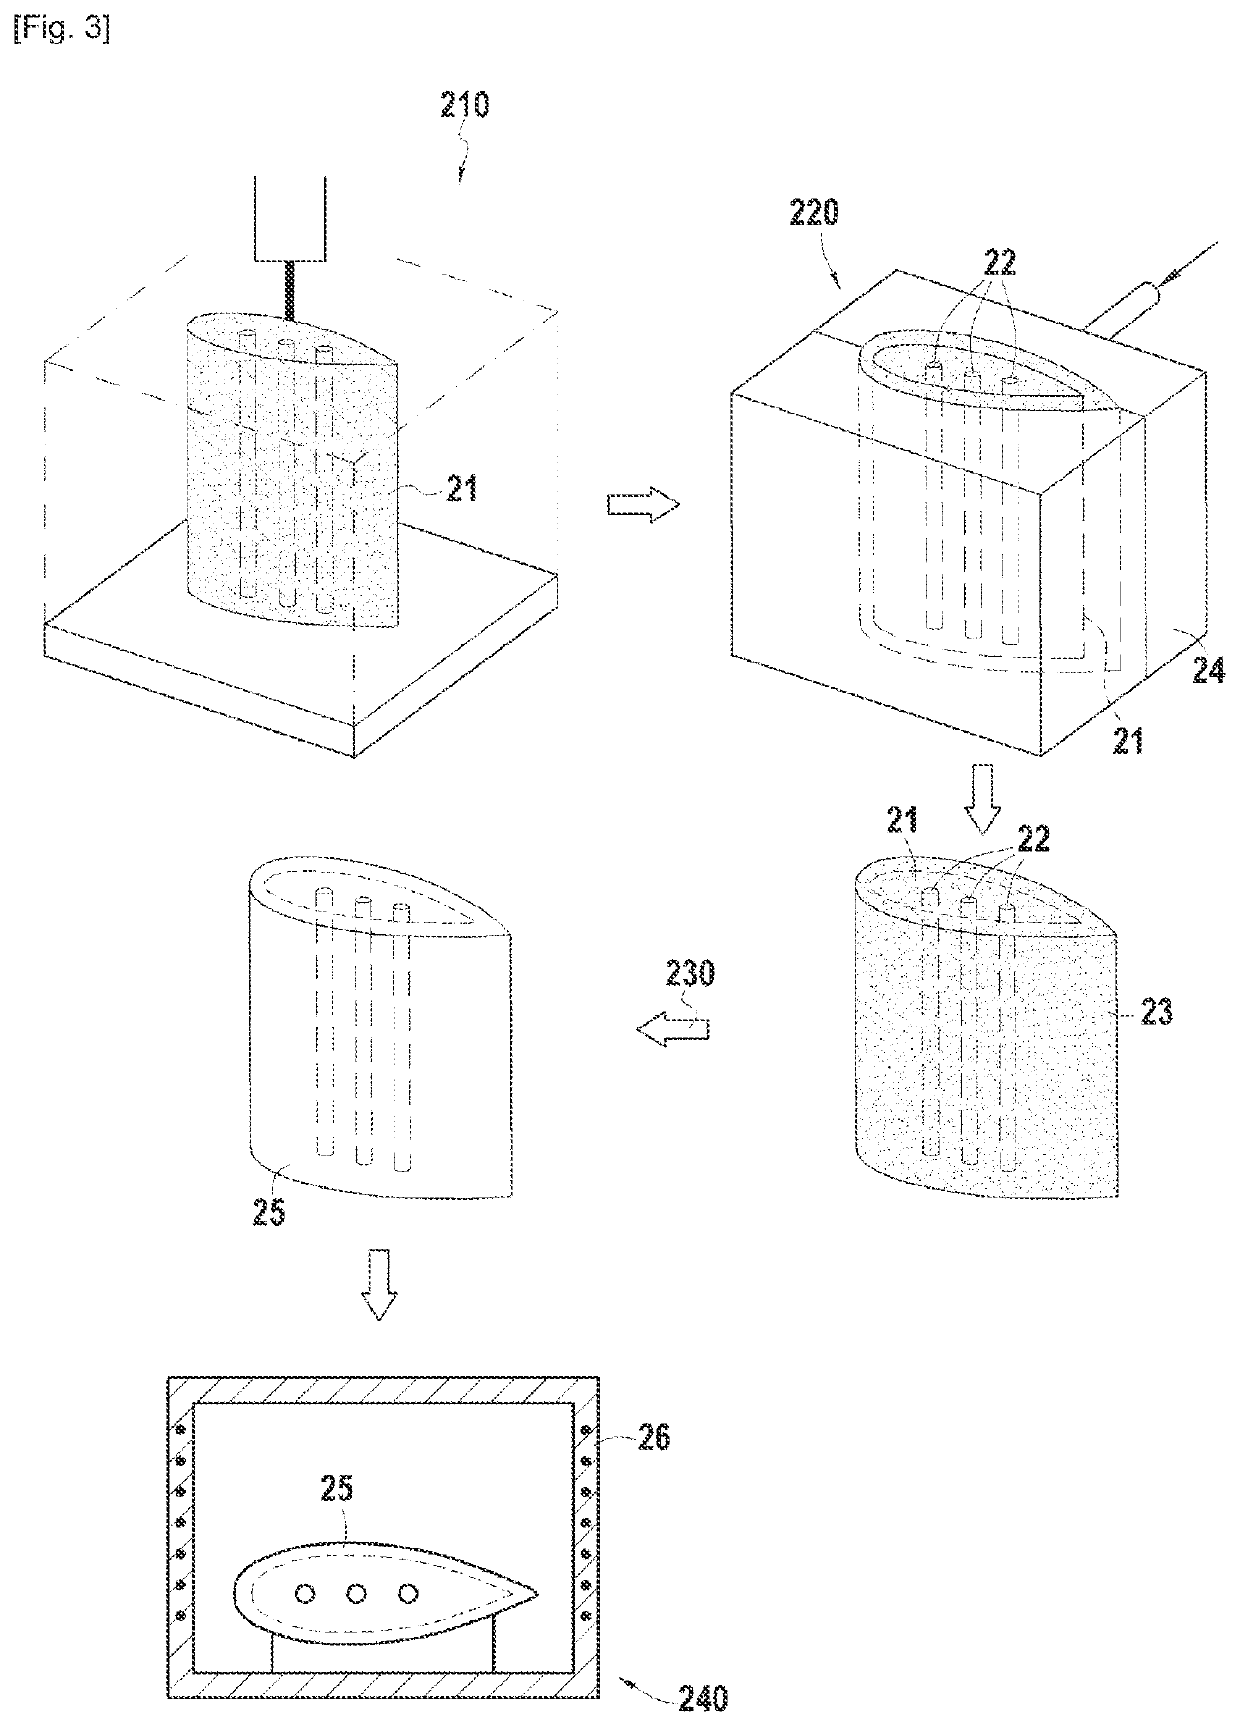 Method for manufacturing a metal part